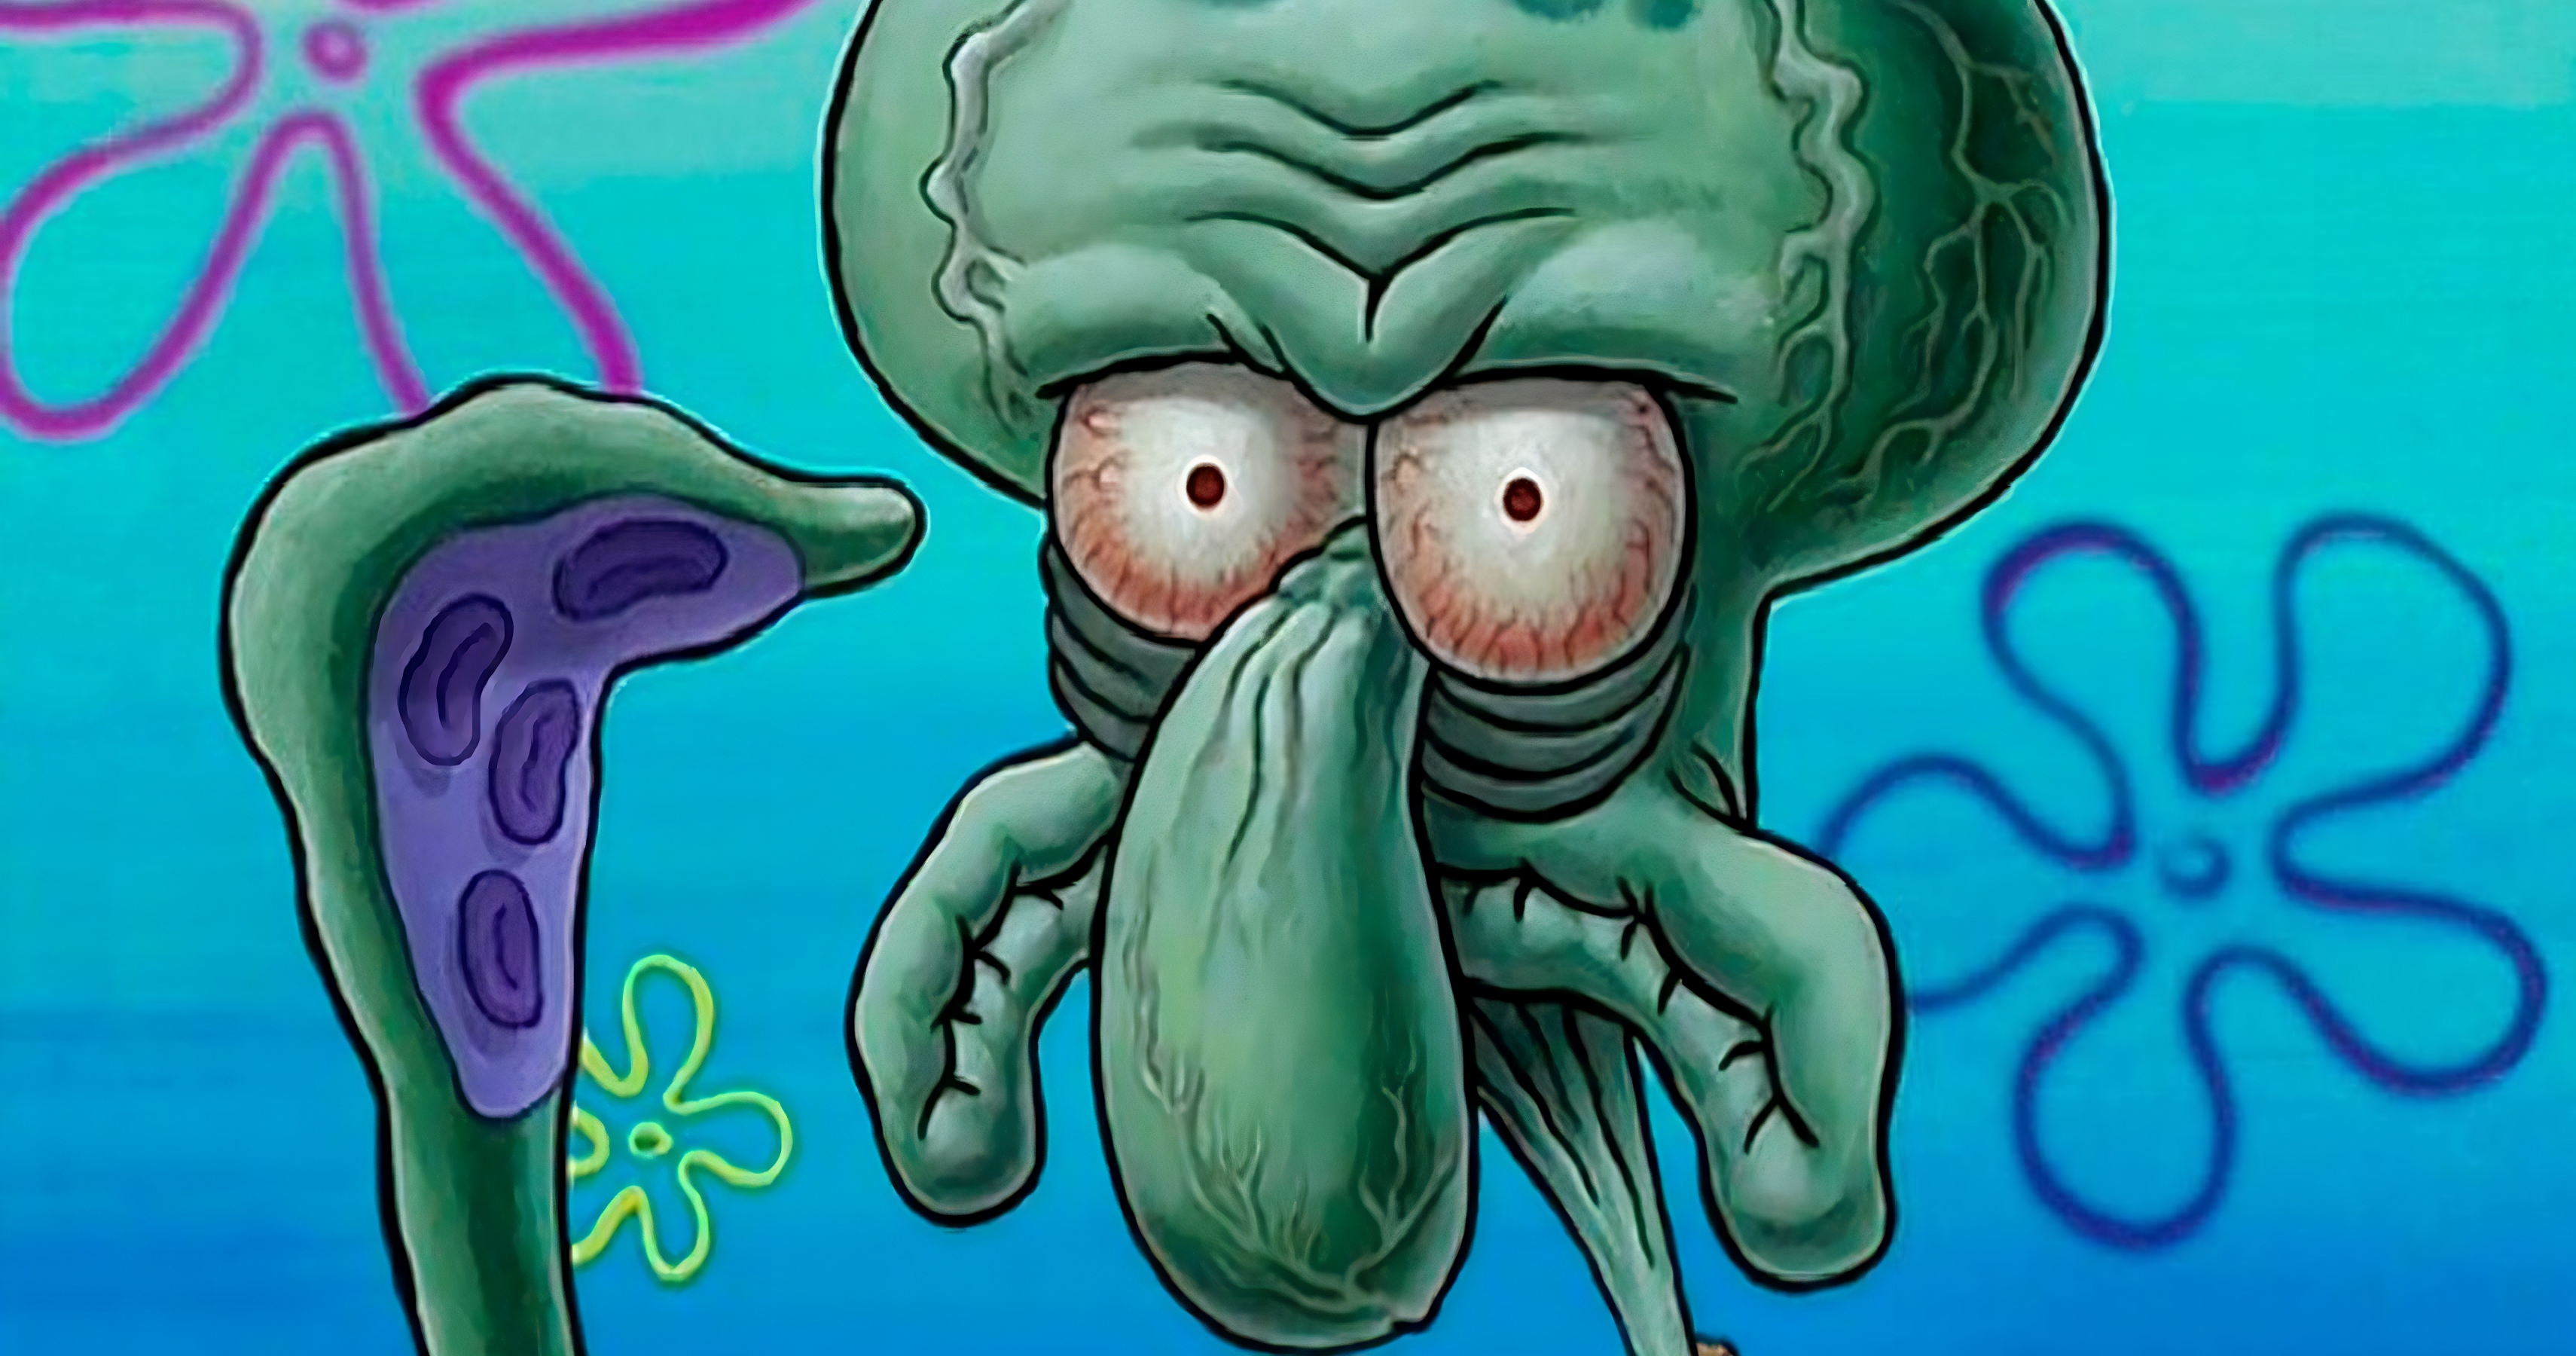 villains that everyone can relate to Squidward